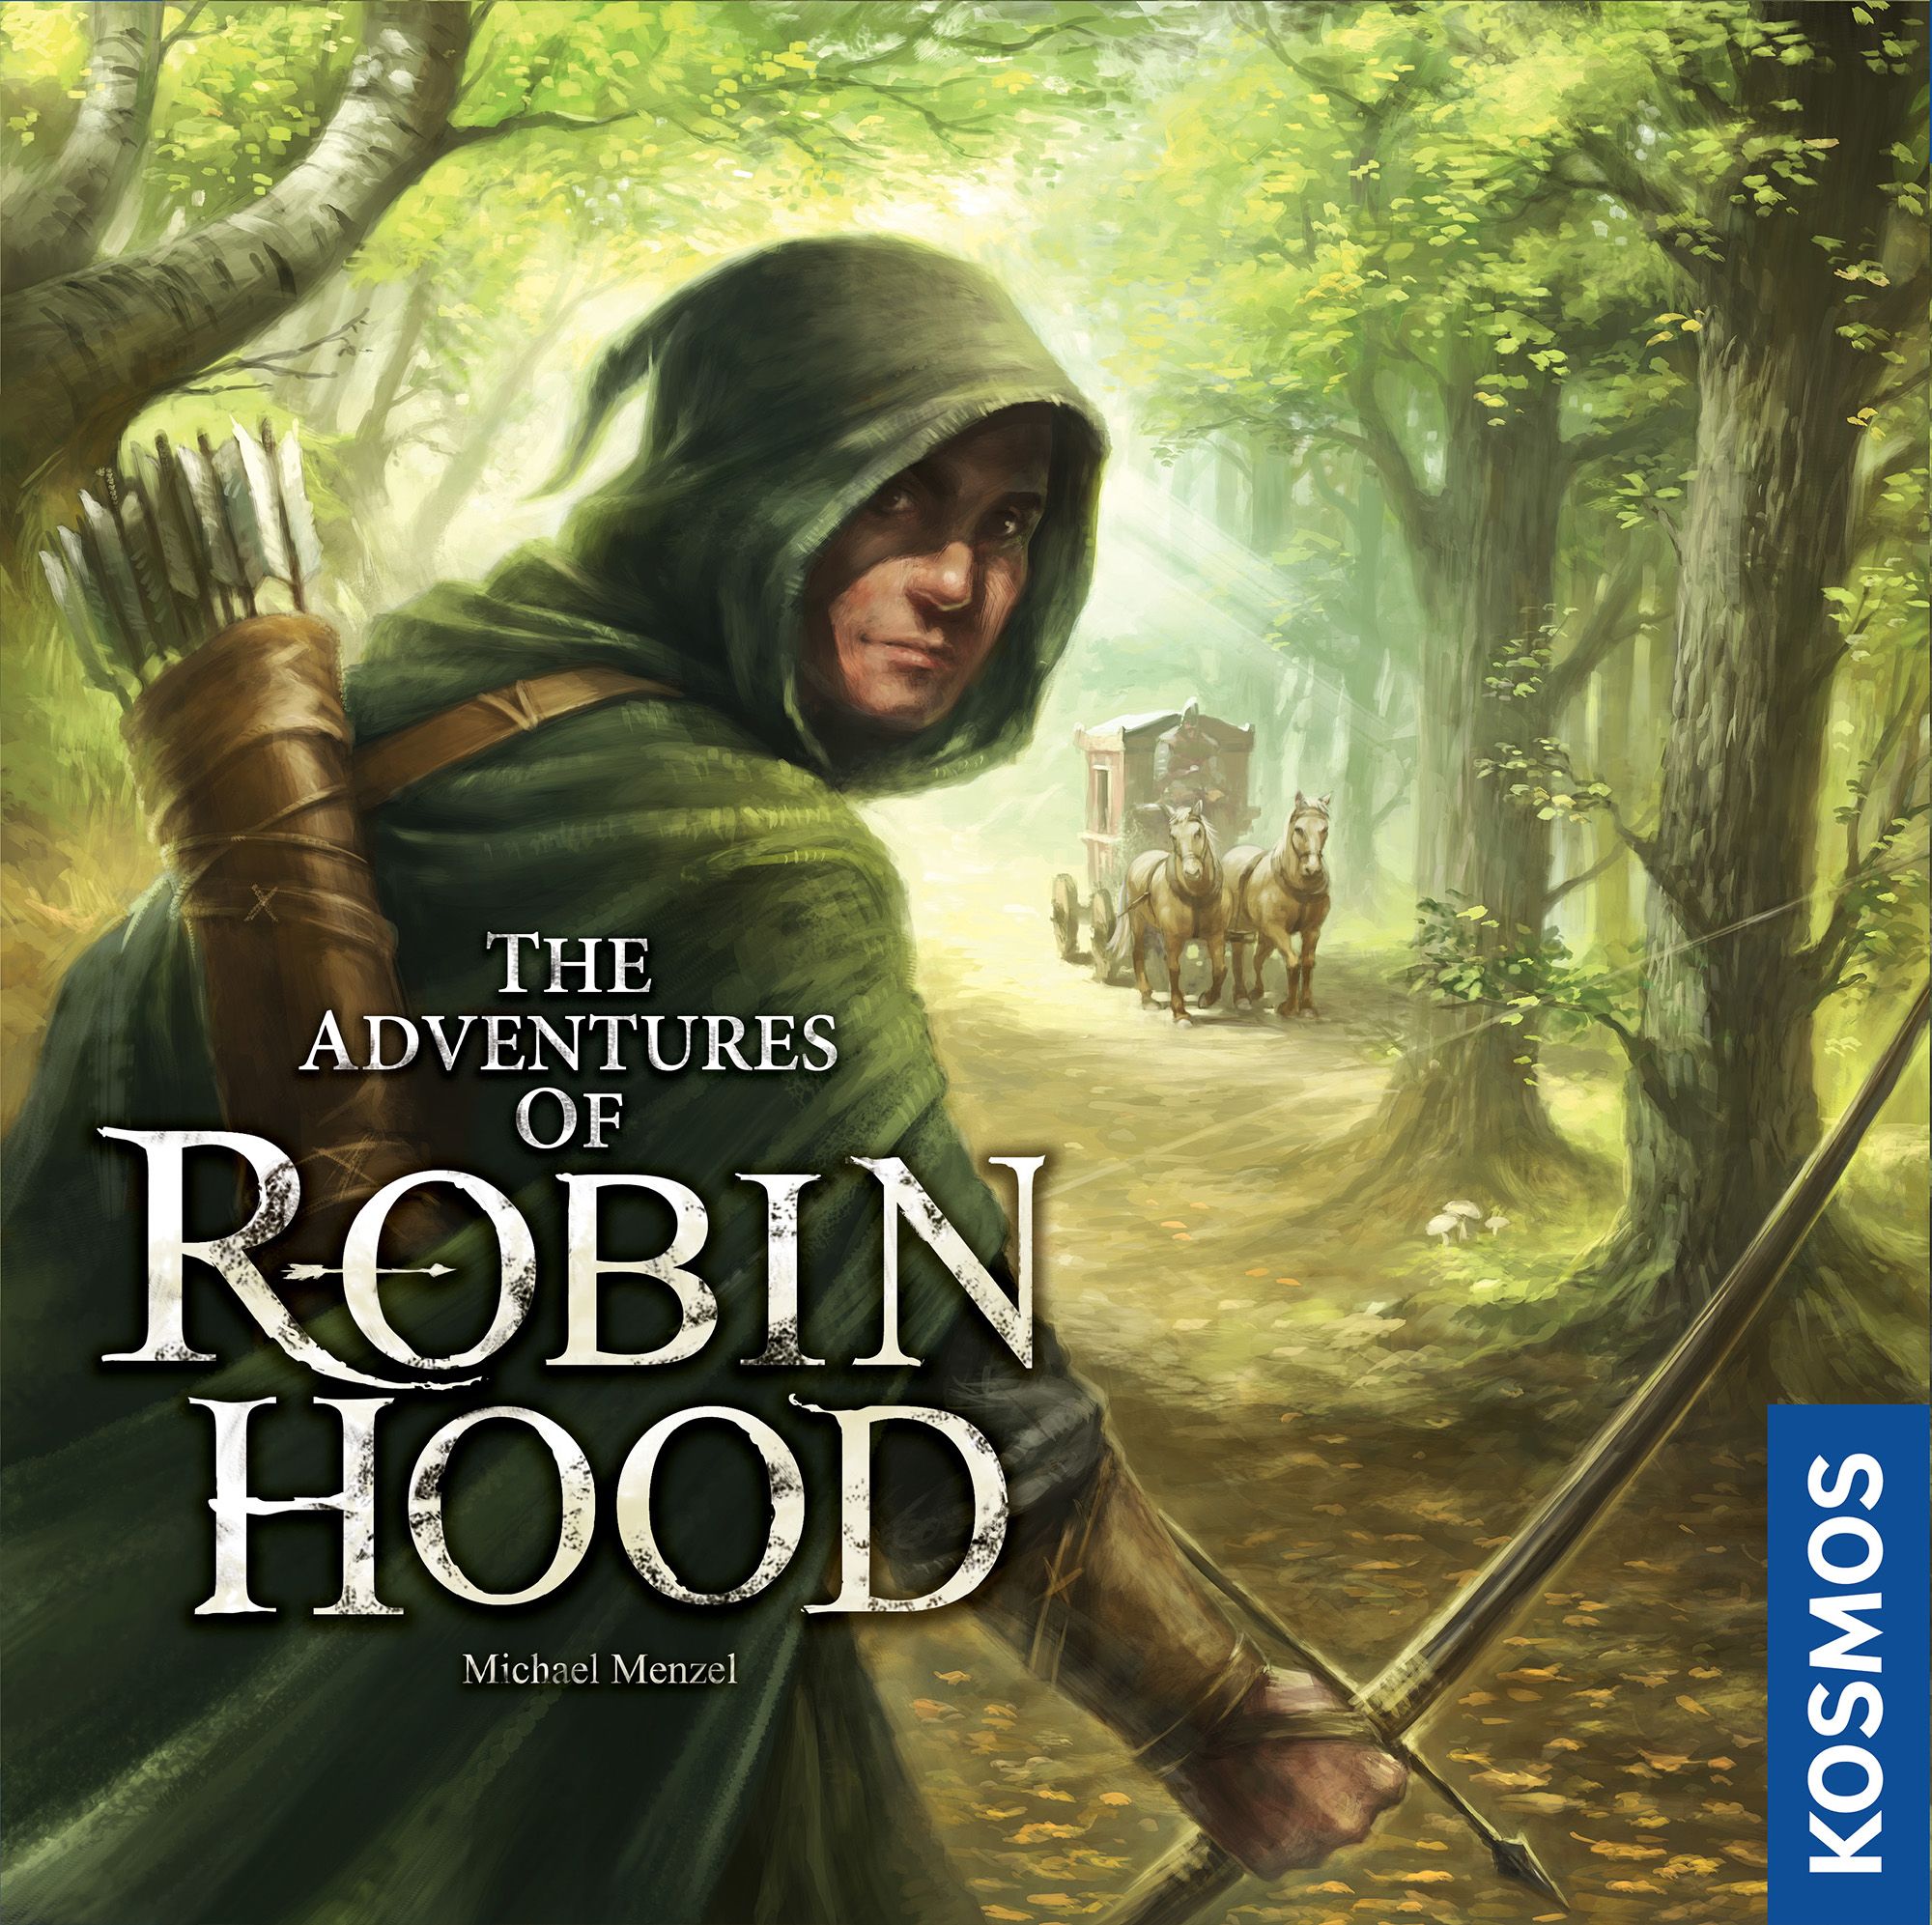 The Adventures of Robin Hood Board Game cover art